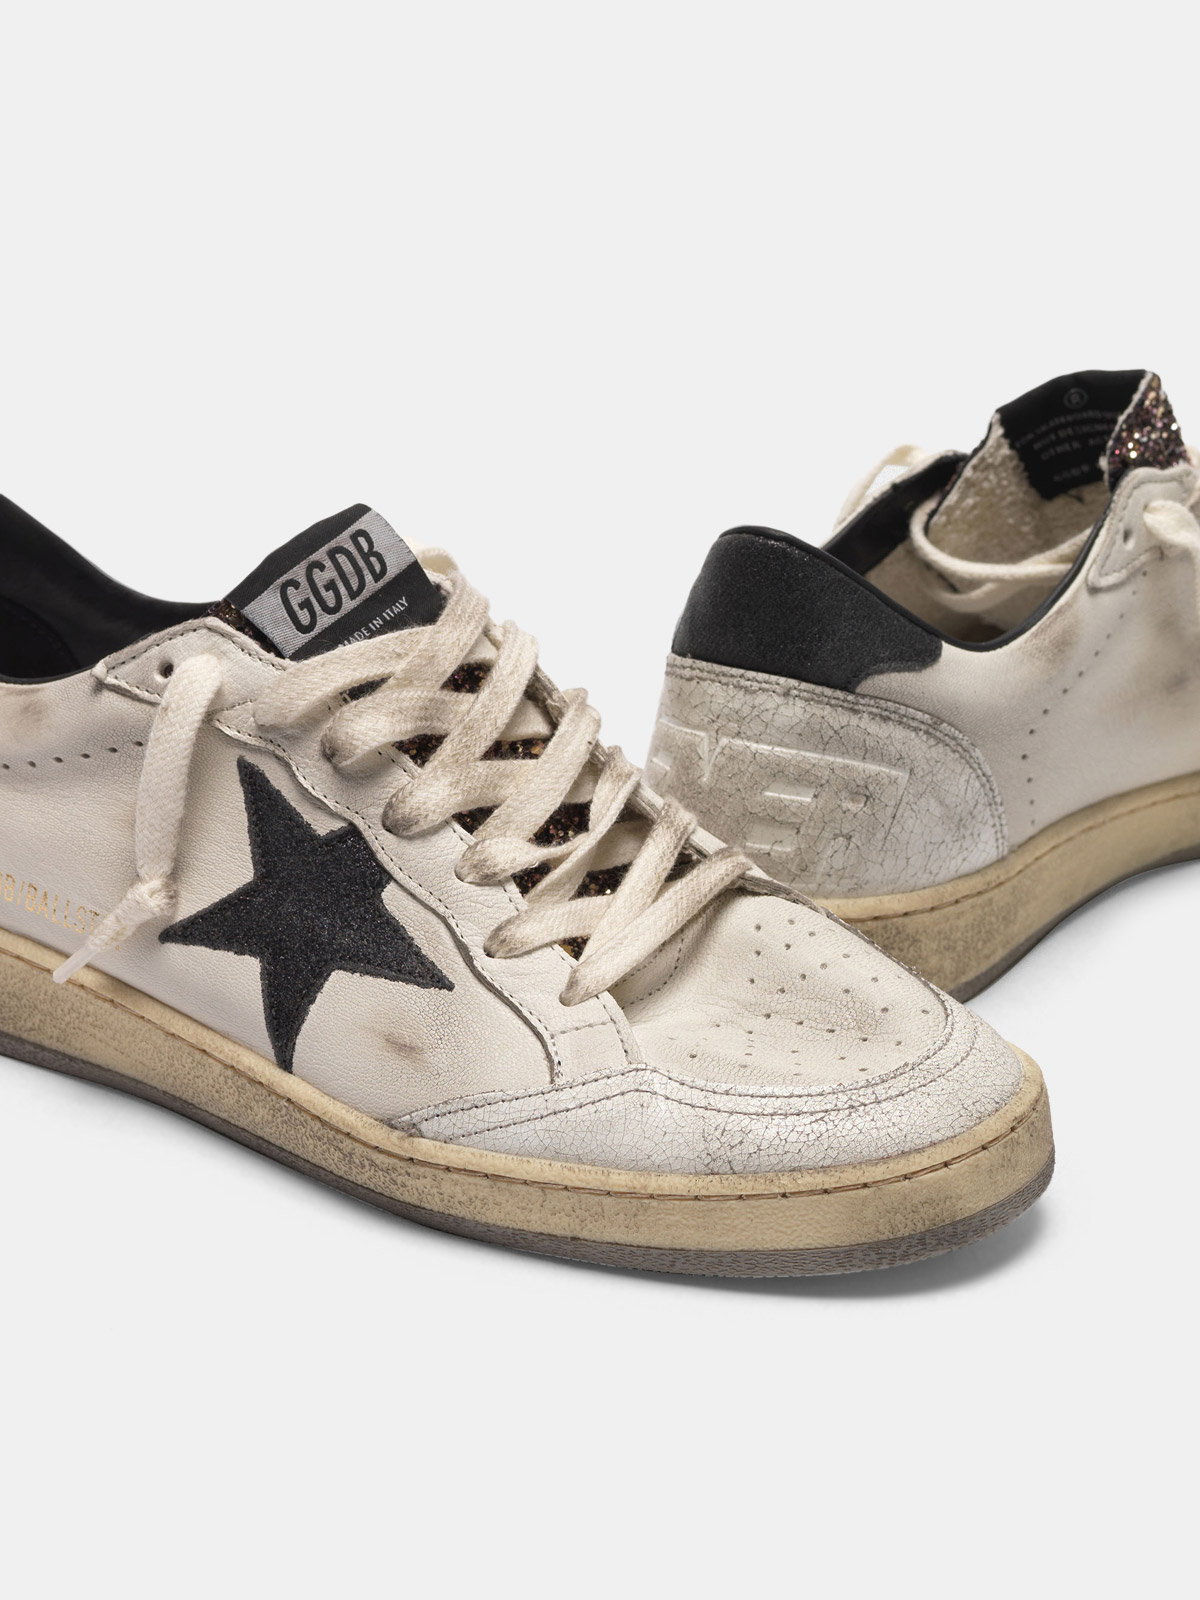 Ball Star sneakers with glitter tongue | Golden Goose